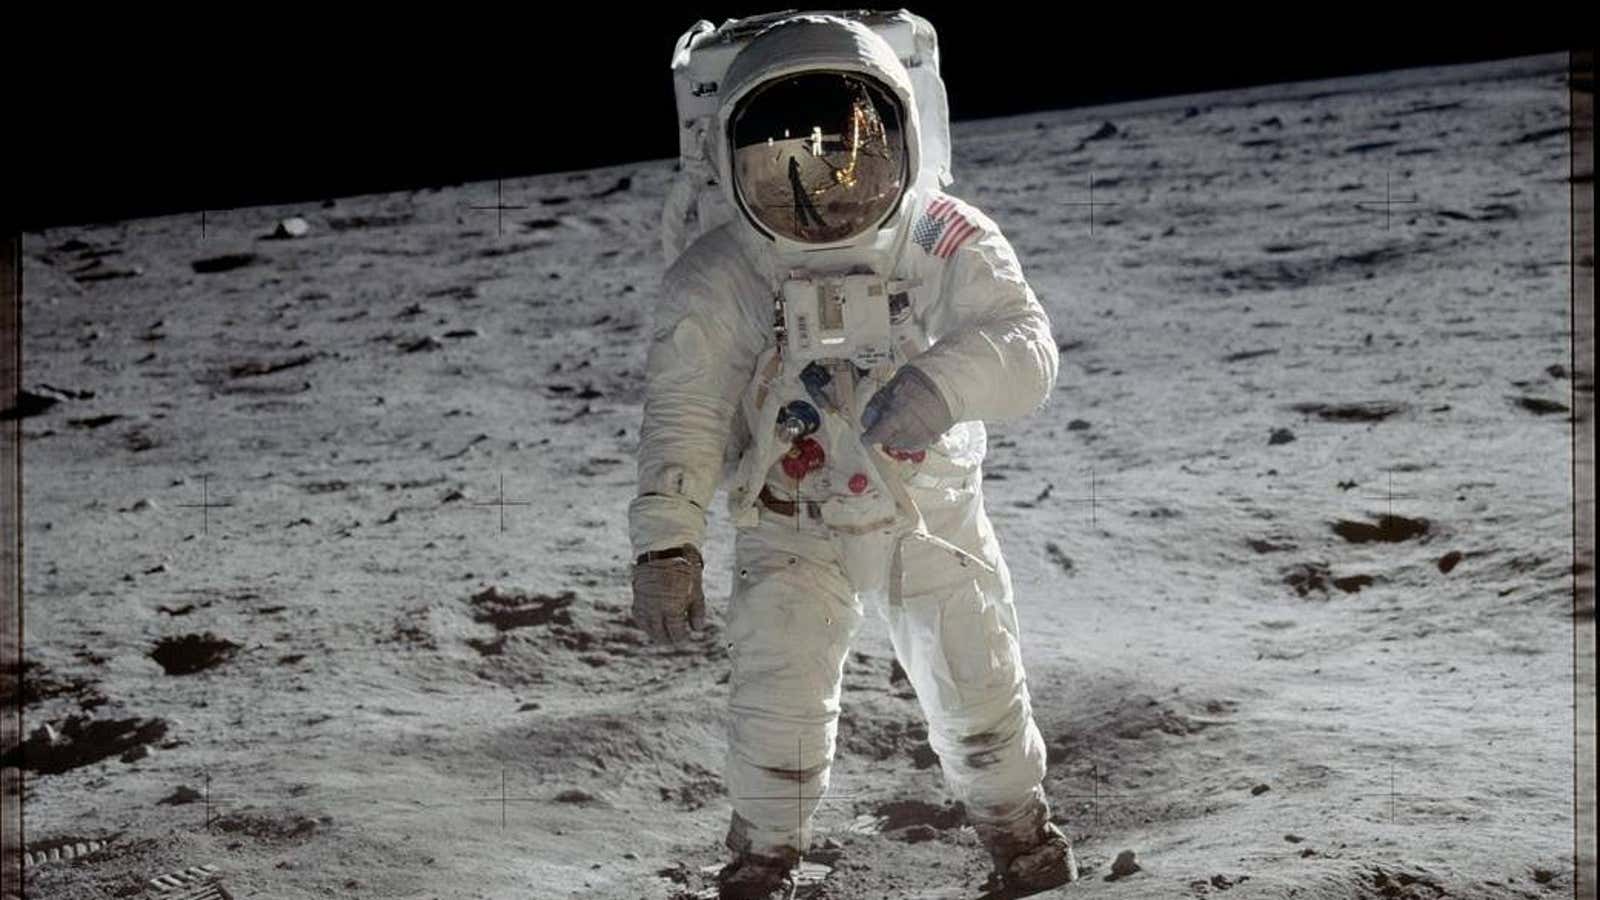 Buzz Aldrin was the first man to pee on the moon.